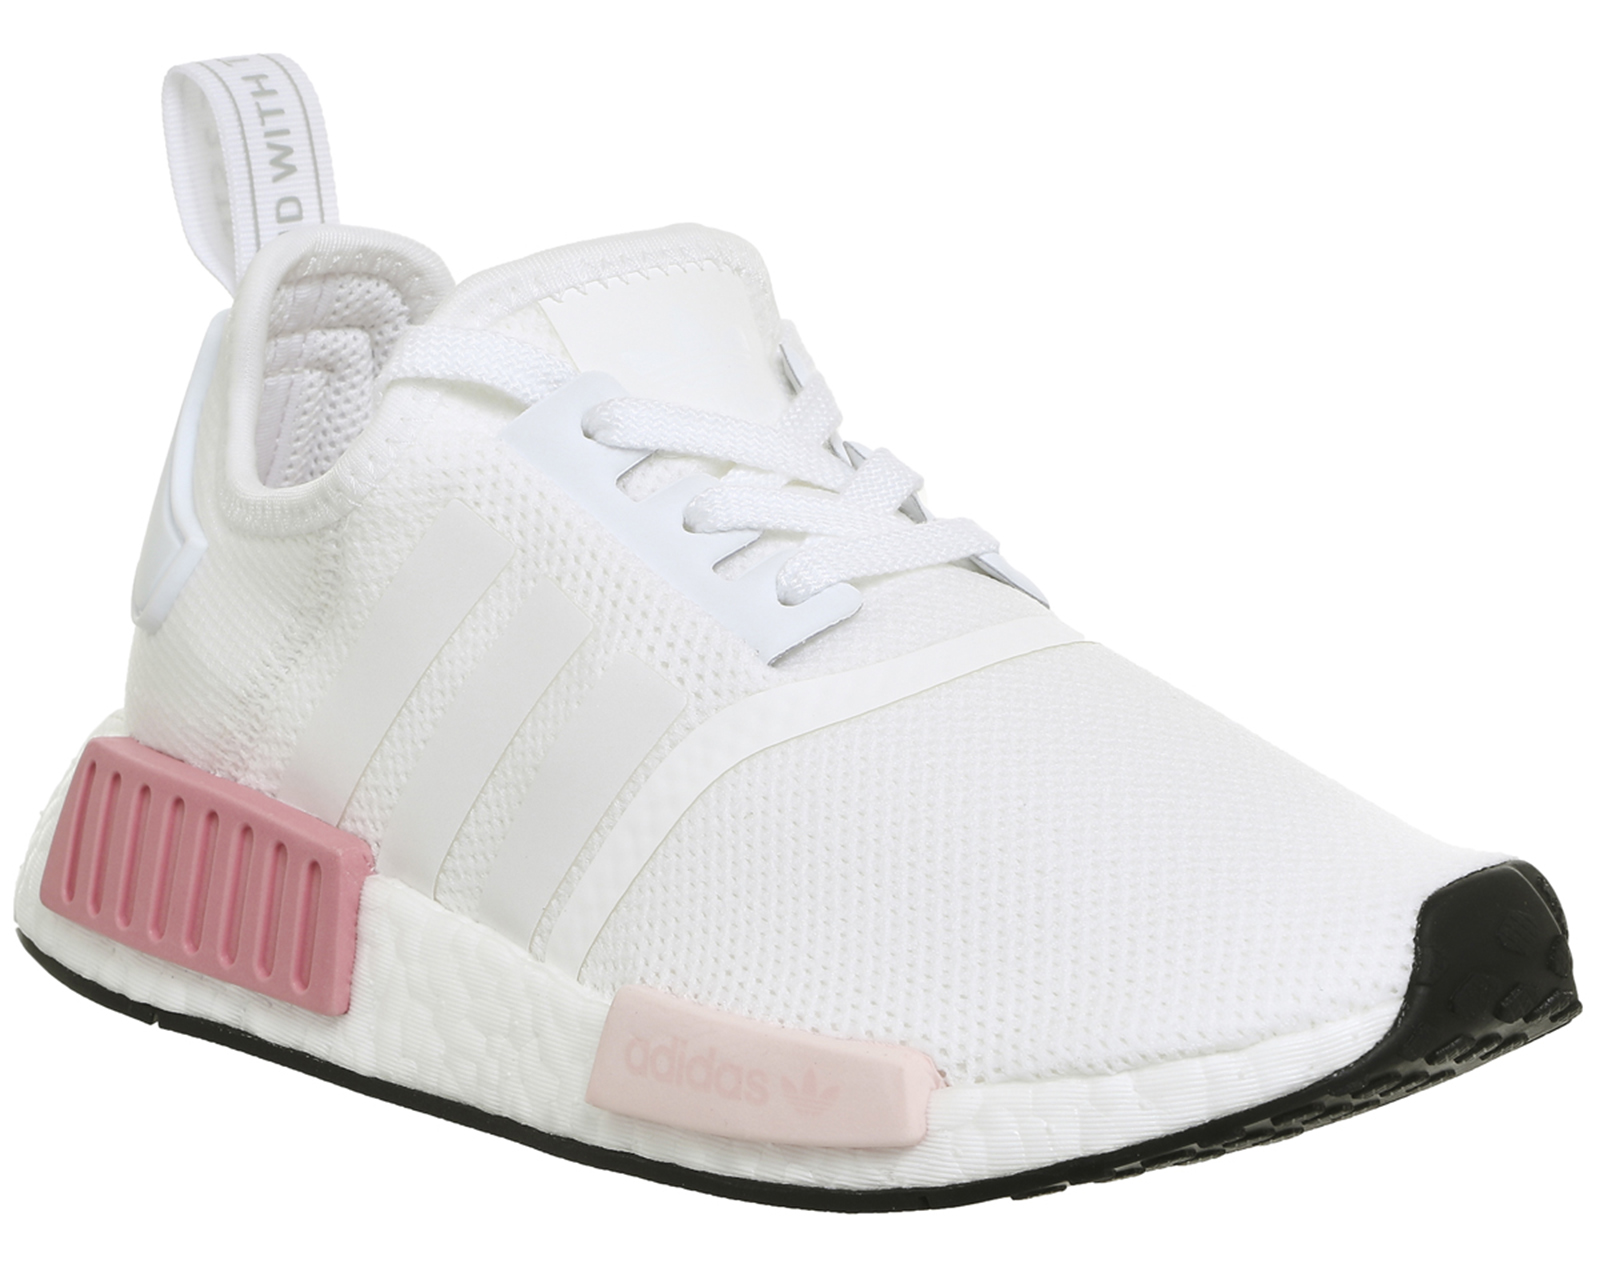 adidas Nmd R1 White Icey Pink - His trainers